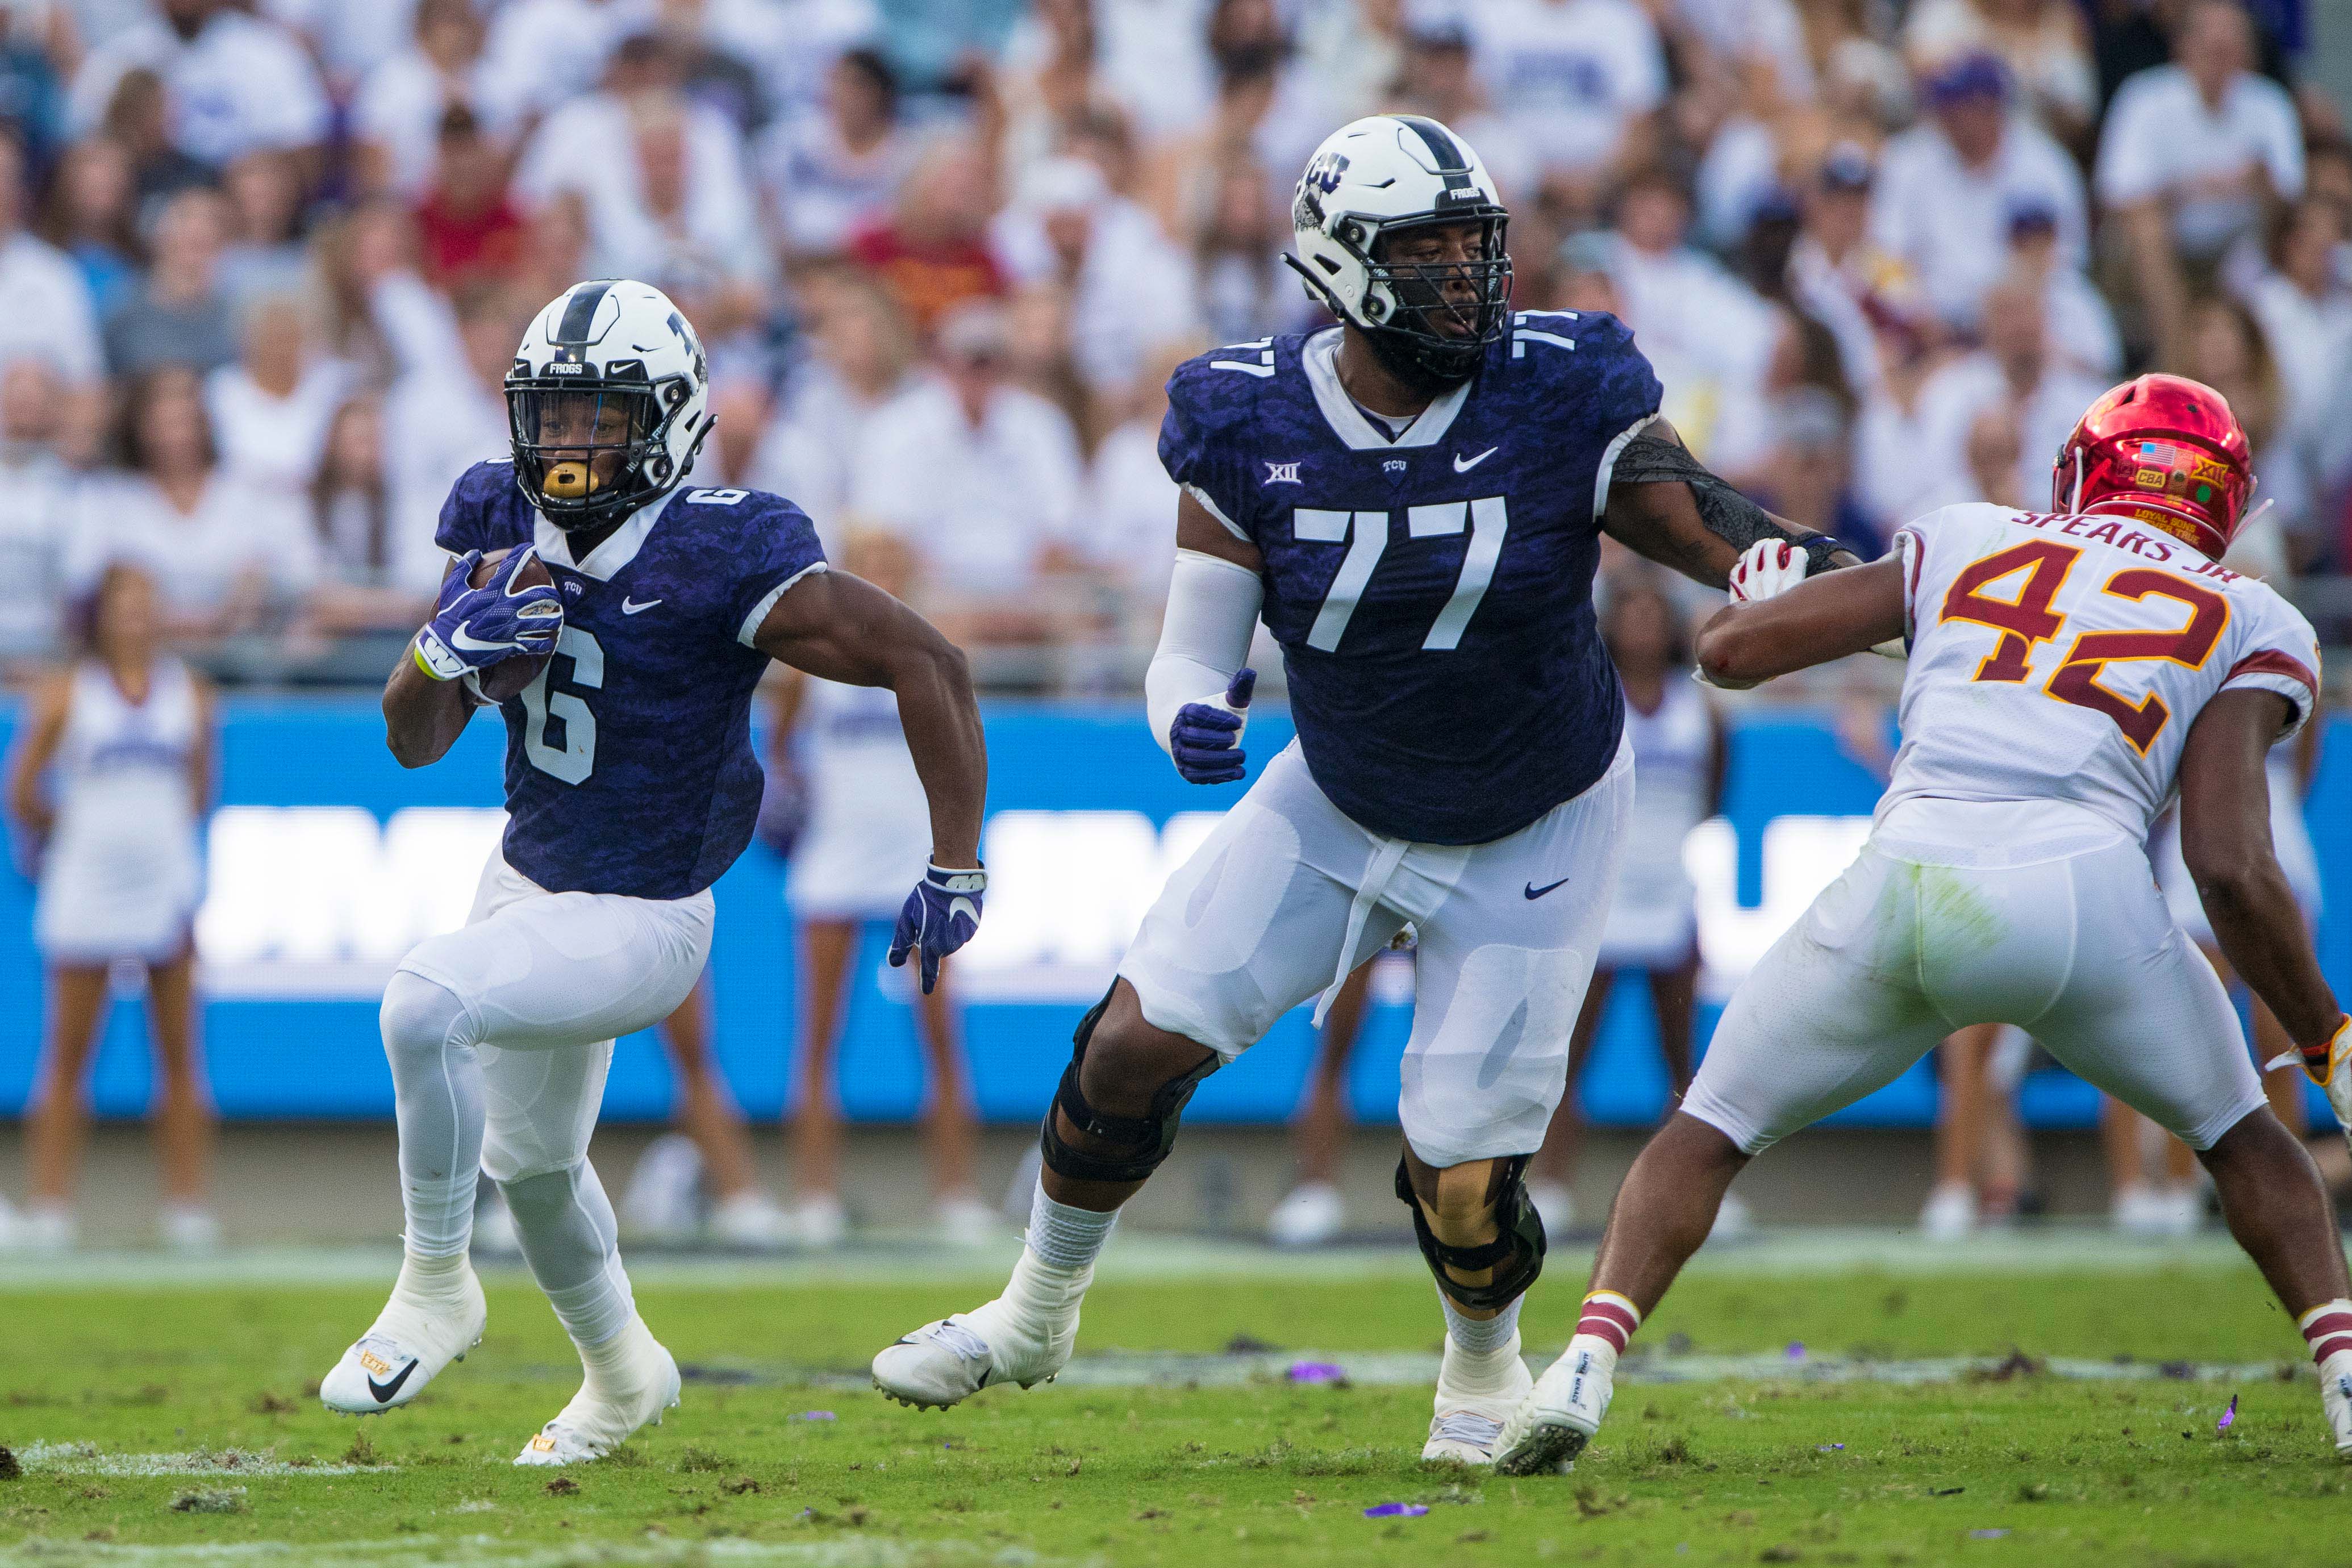 TCU Horned Frogs running back Darius Anderson (6) and offensive tackle Lucas Niang (77) in action during the game against the Iowa State Cyclones at Amon G. Carter Stadium.